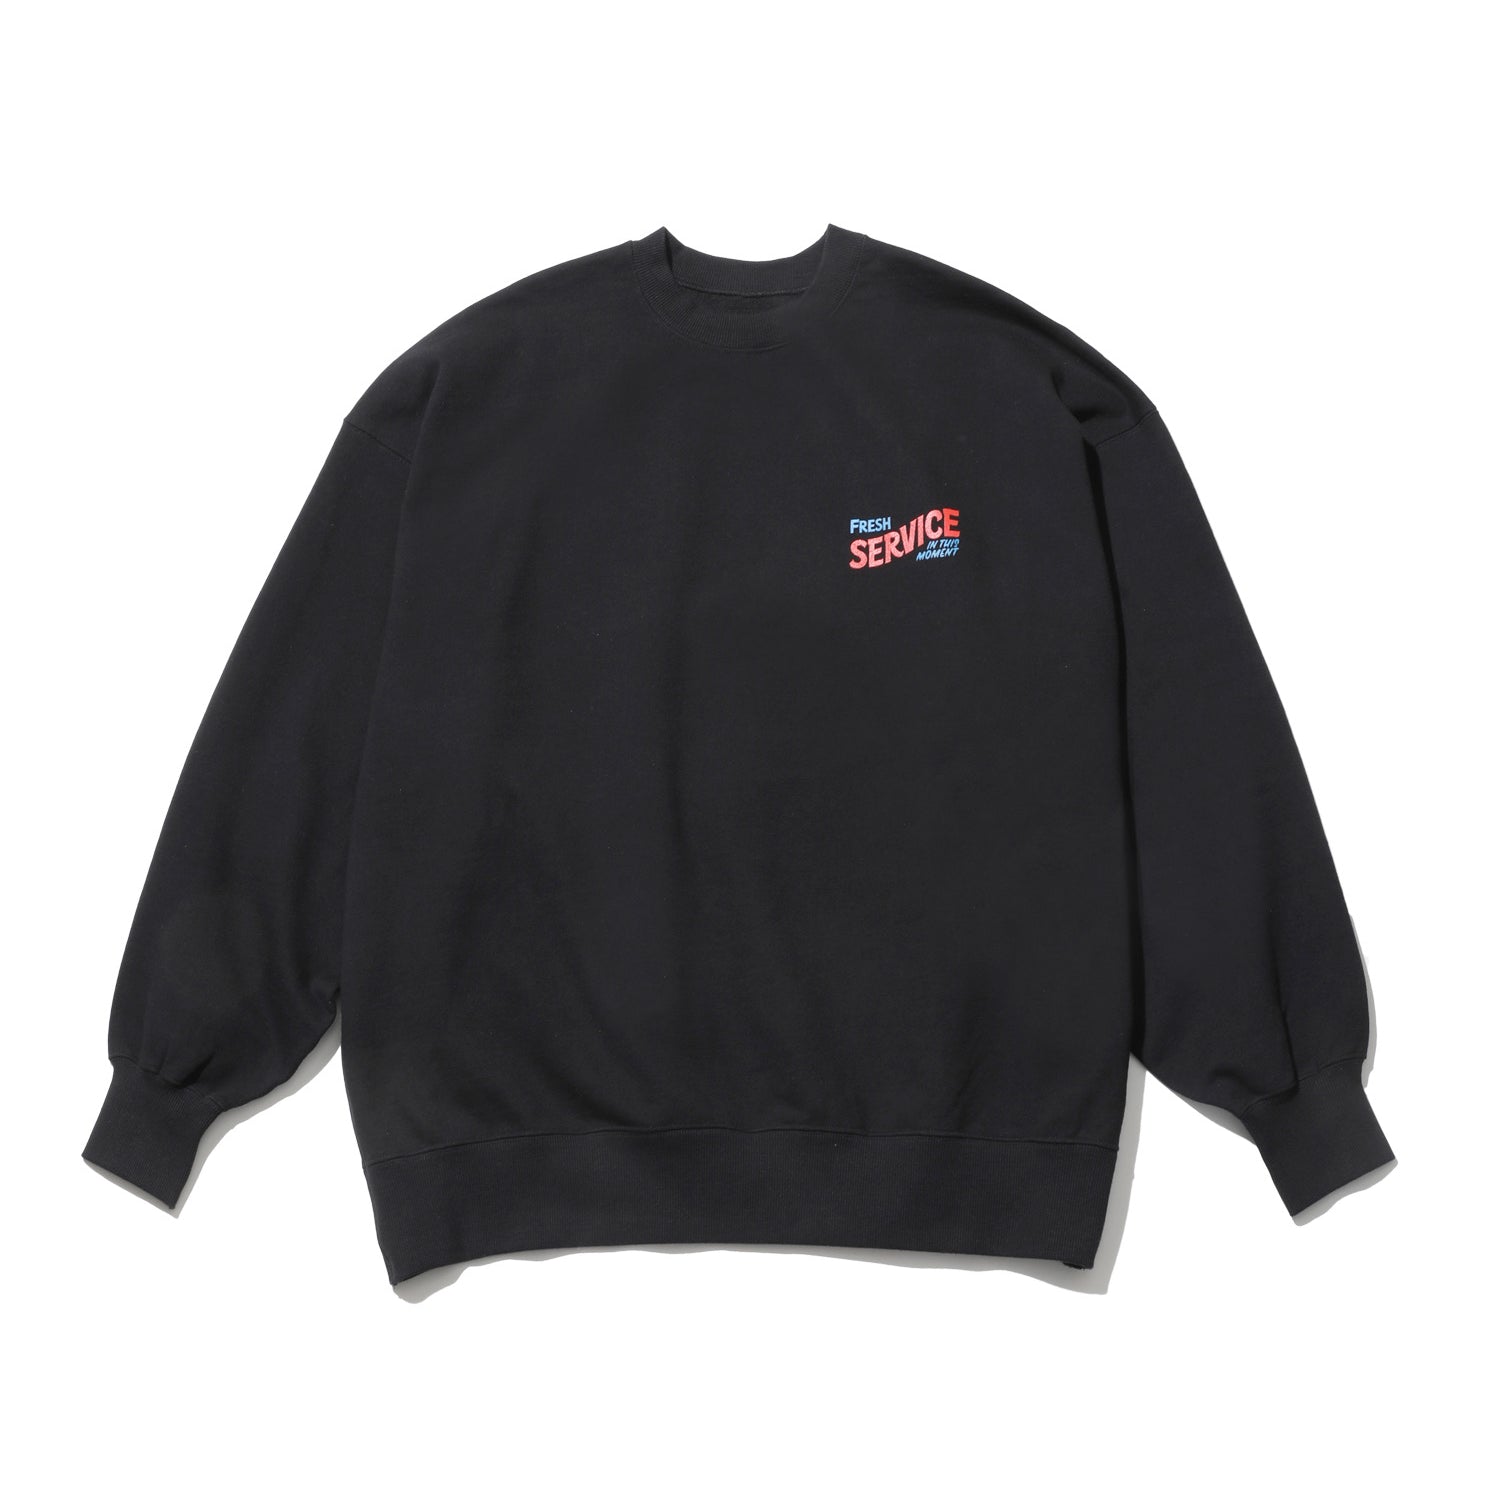 CORPORATE PRINTED CREW NECK SWEAT “All Day All Night”